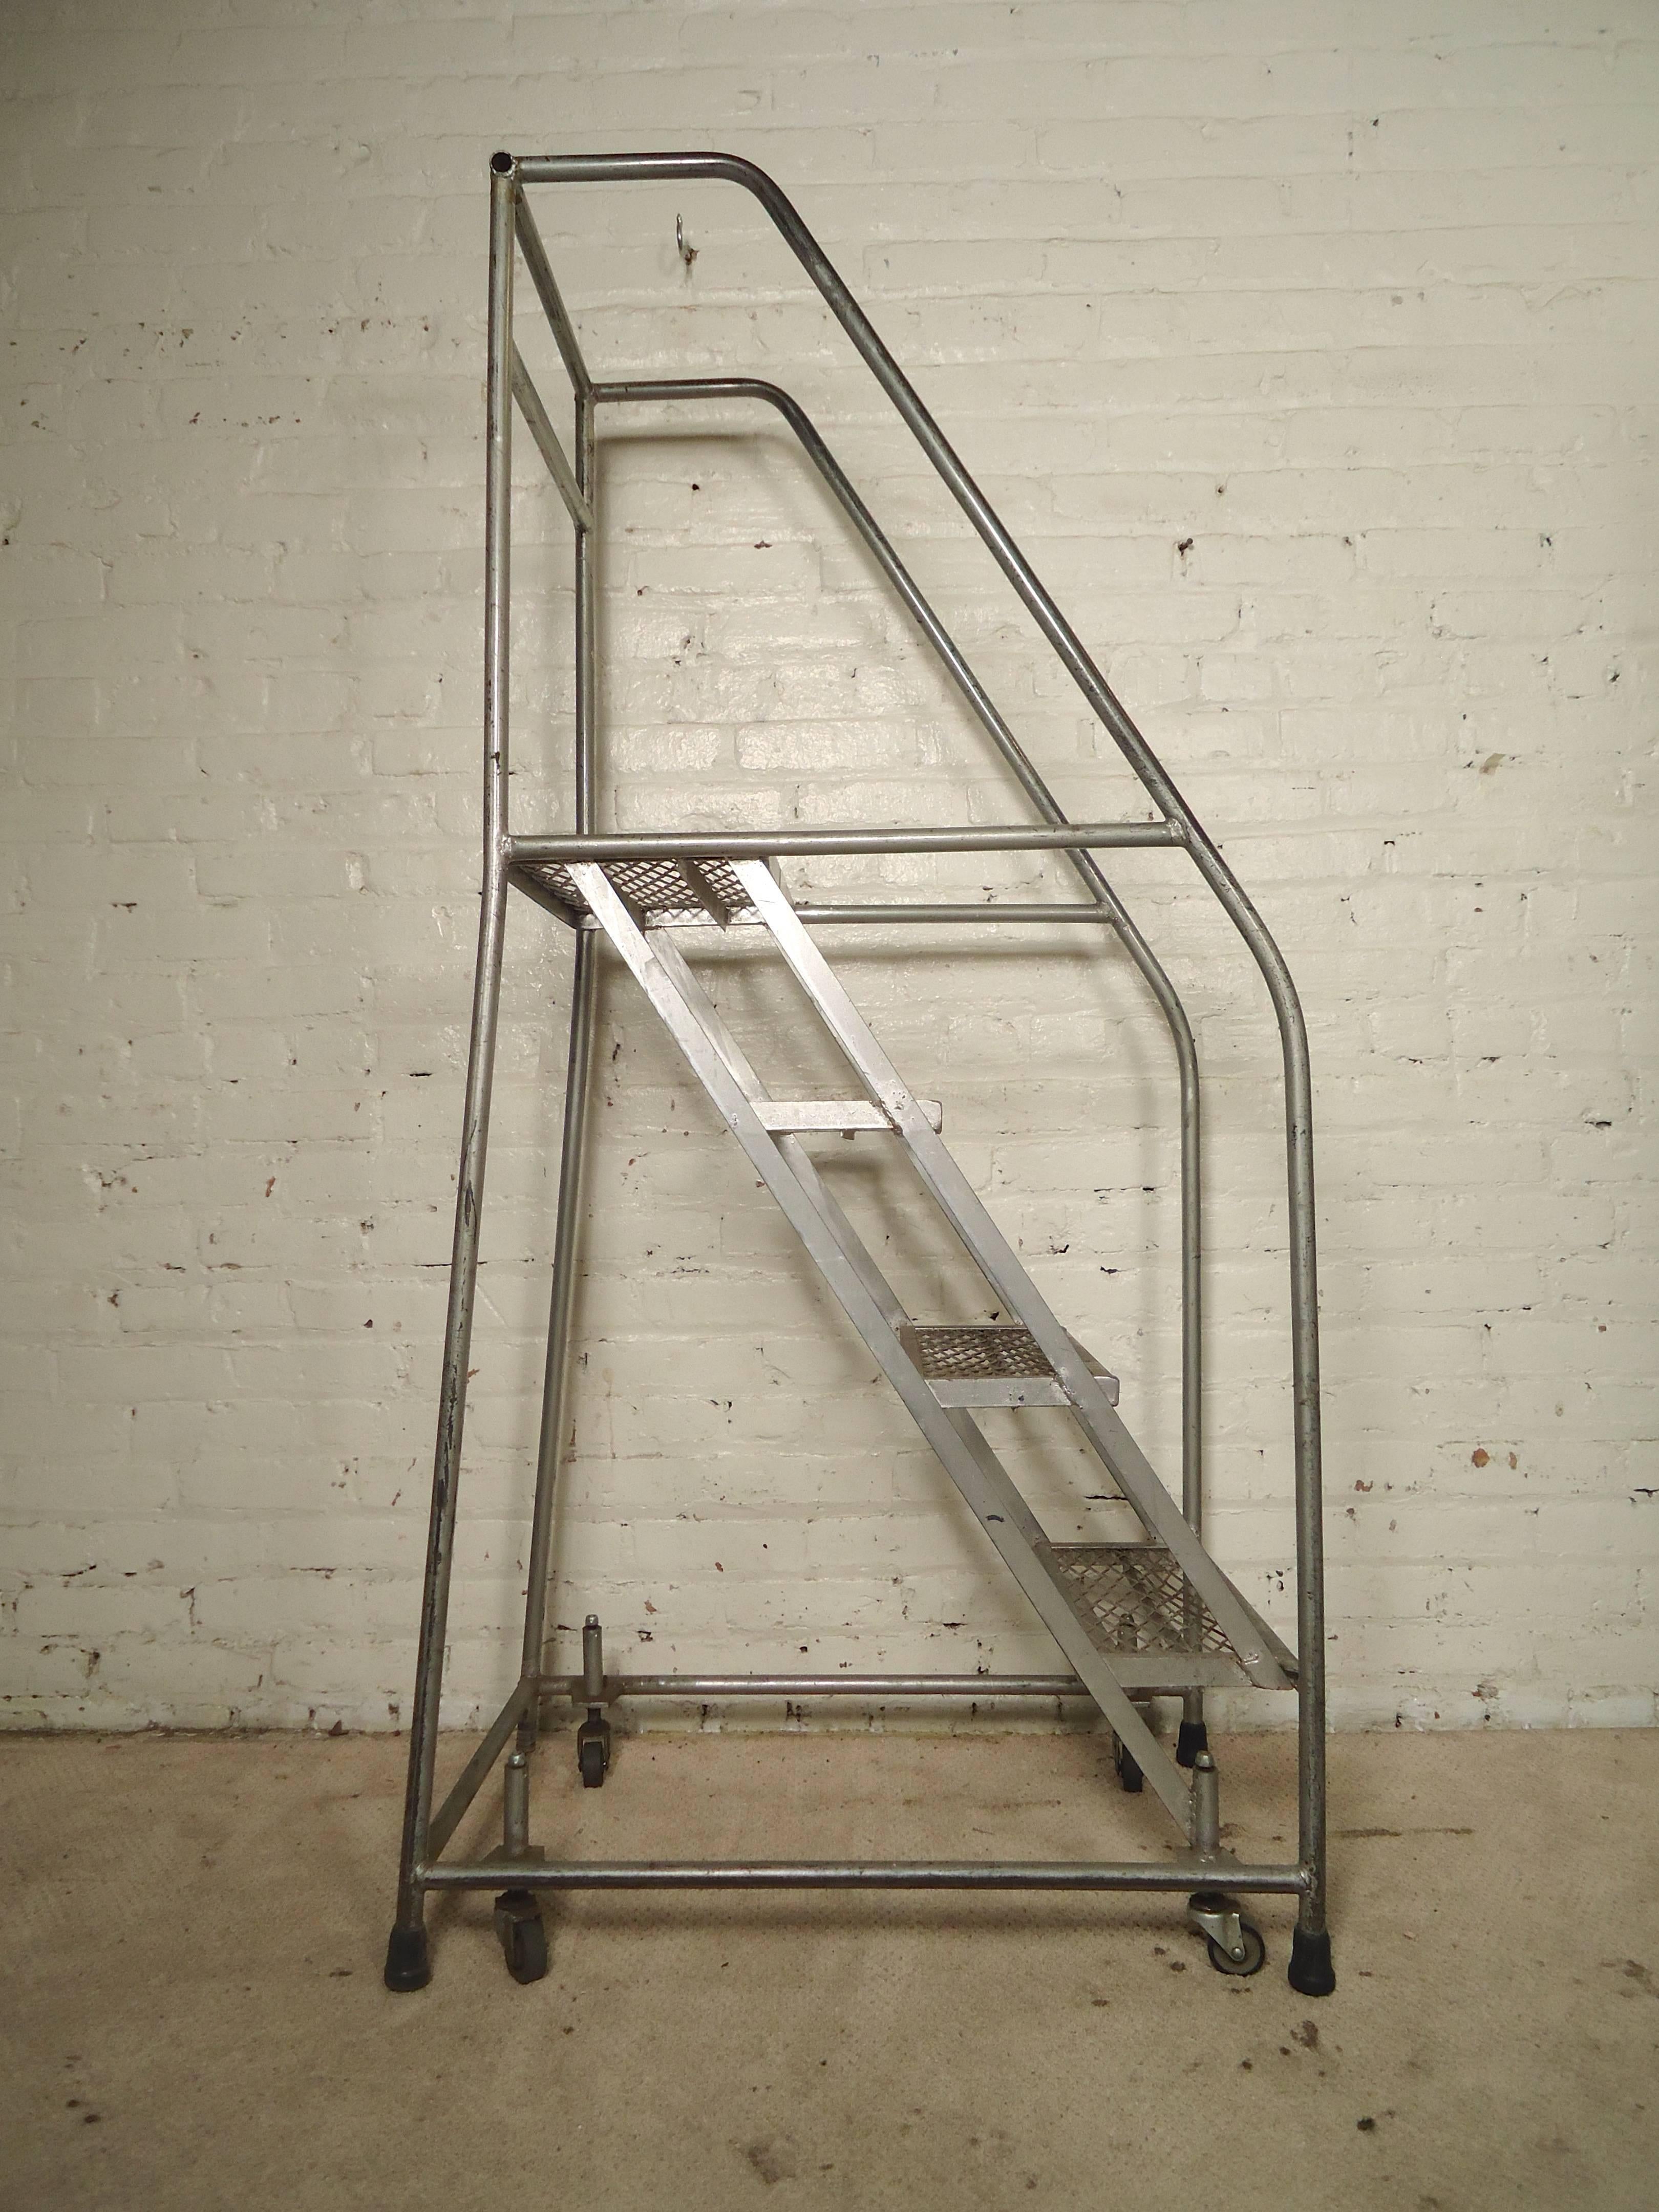 Single four step metal rolling ladder with handrails and top step railing. Features spring loaded swivel casters that retract under user’s weight. Top step is 39